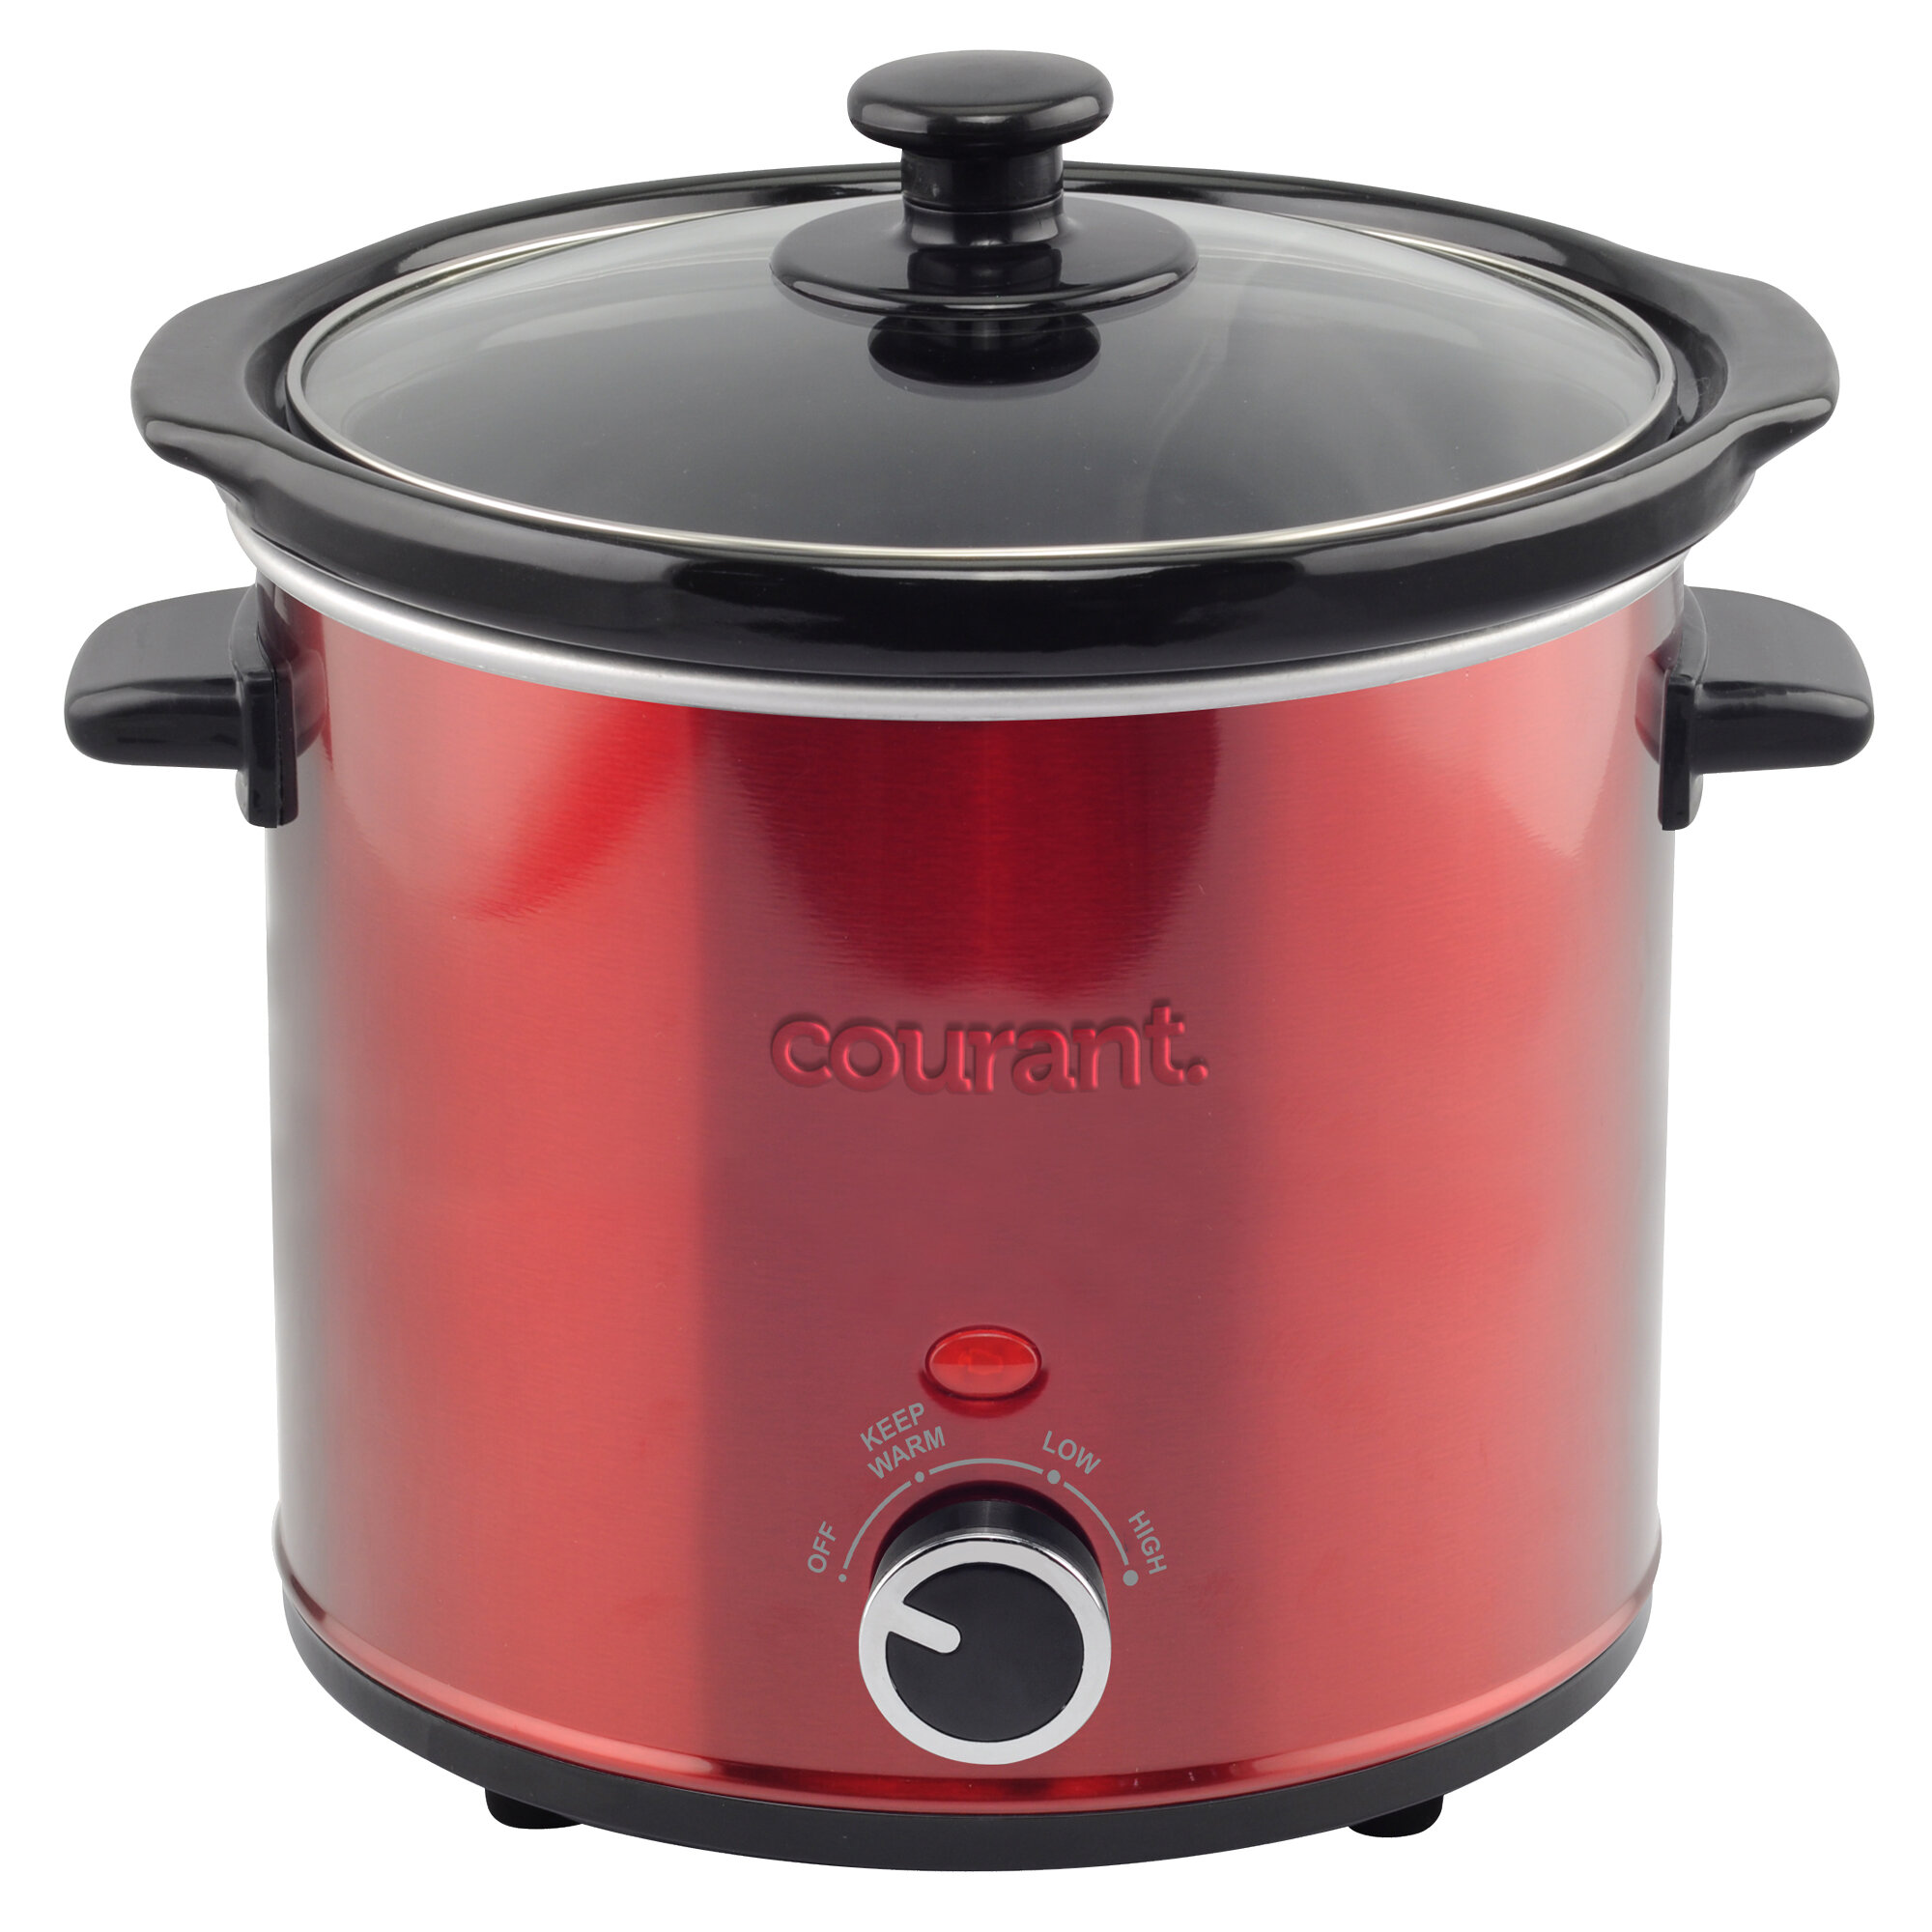 Courant 7 Qt. Stainless Steel Slow Cooker with Temperature